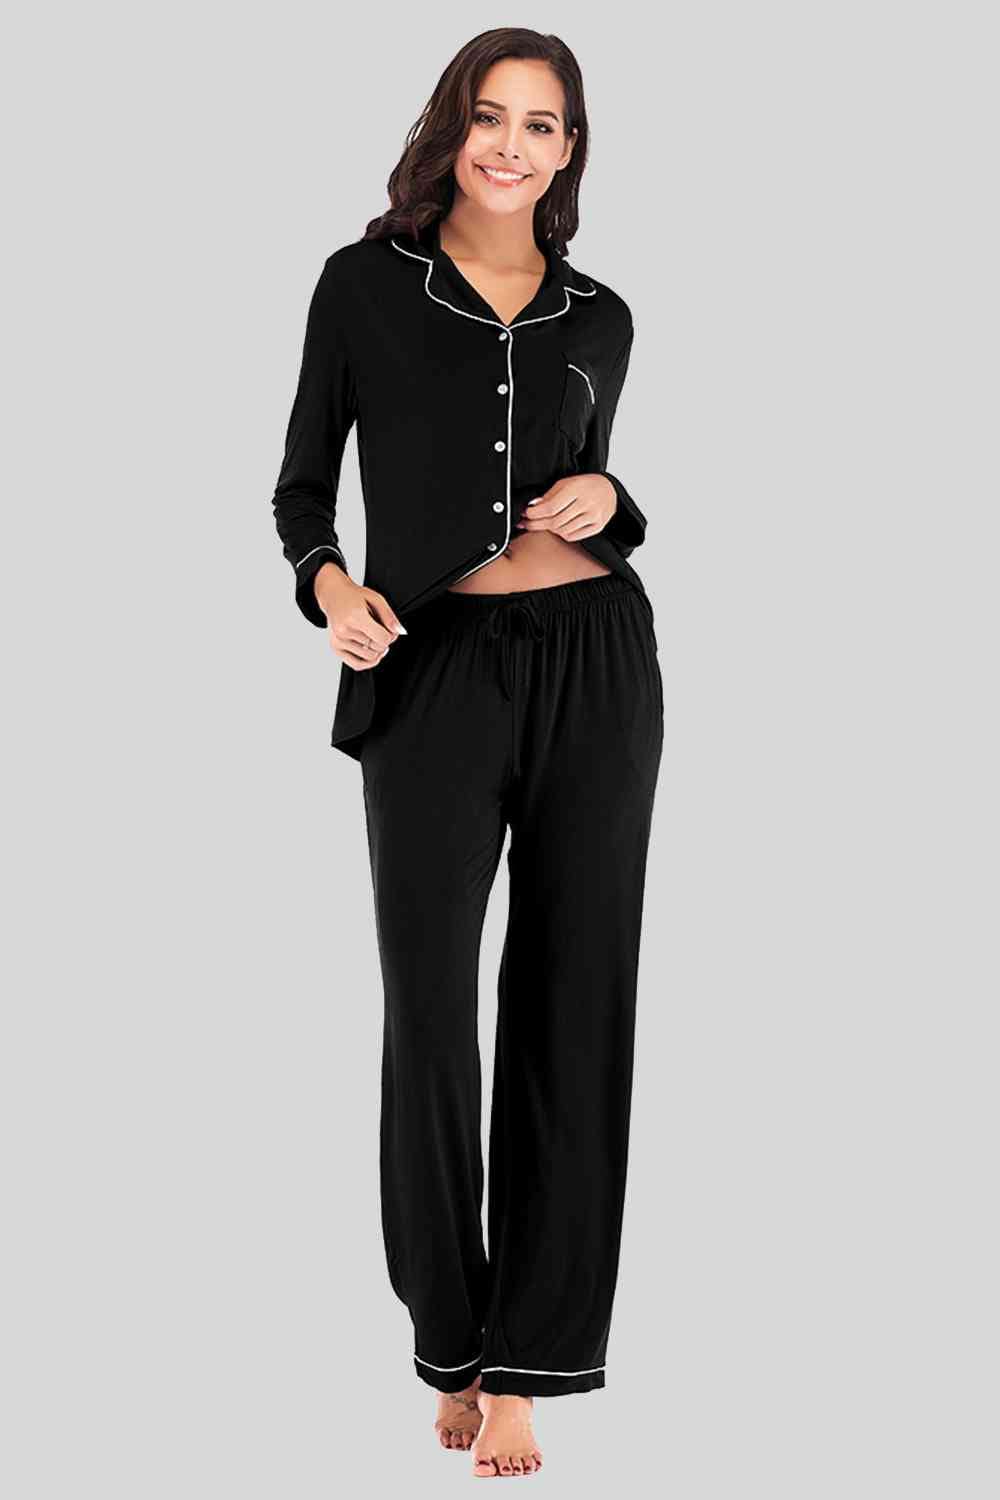 Collared Neck Long Sleeve Loungewear Set with Pockets Black / S